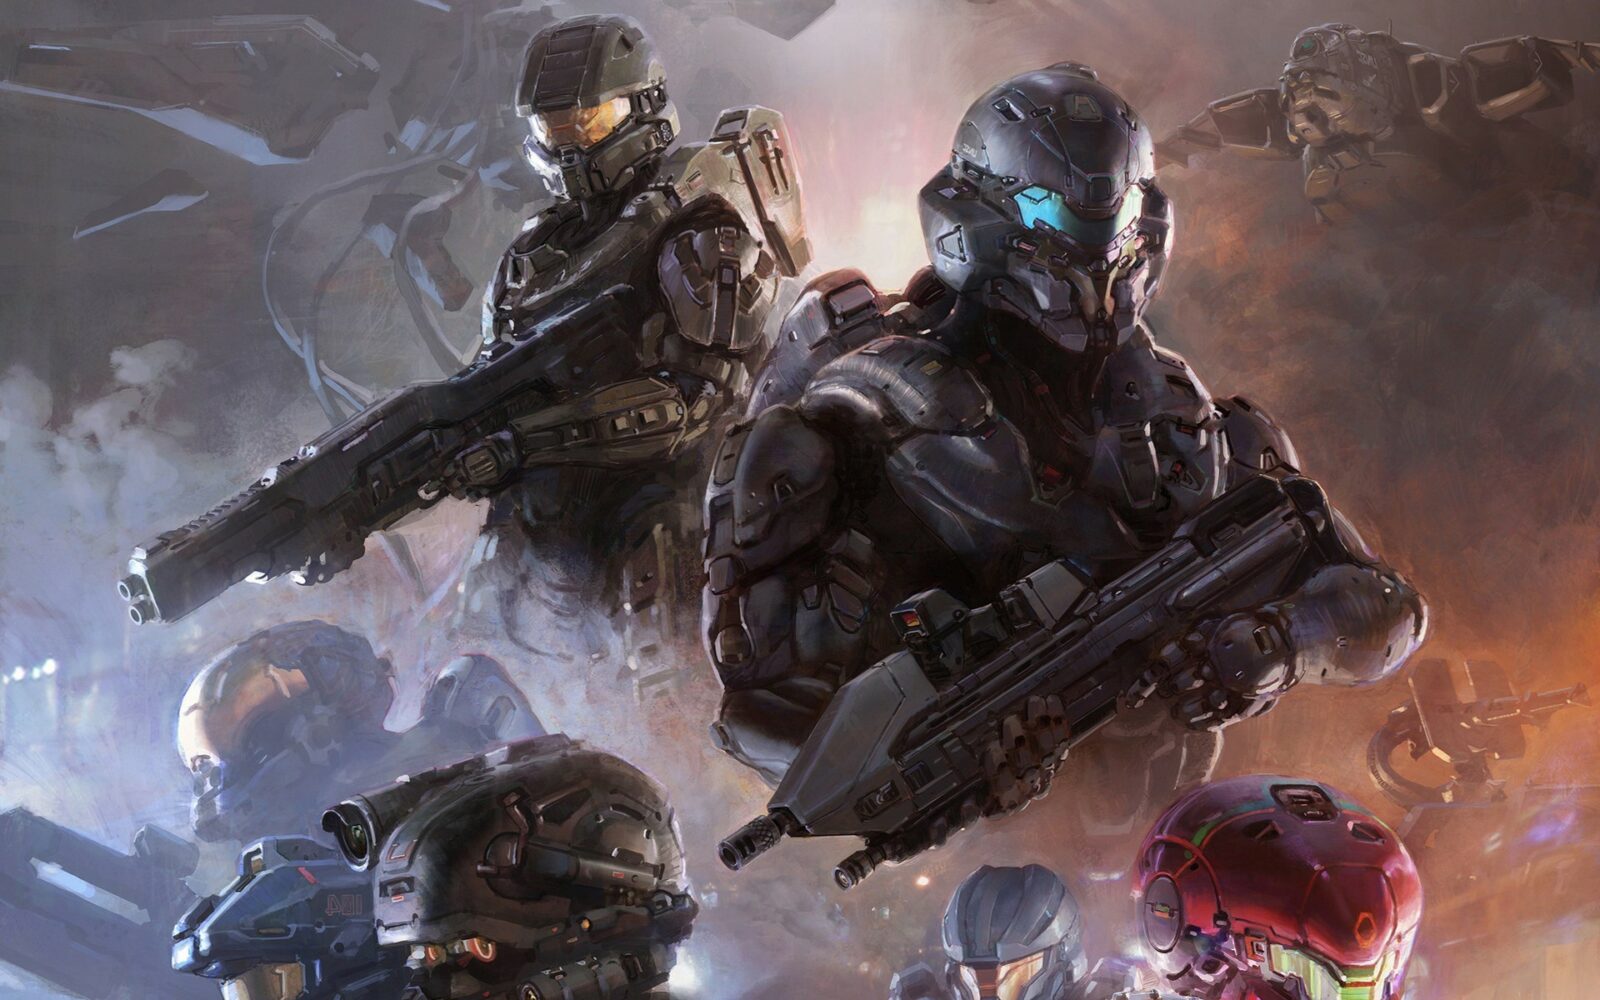 Can Halo 5 be played on PC?